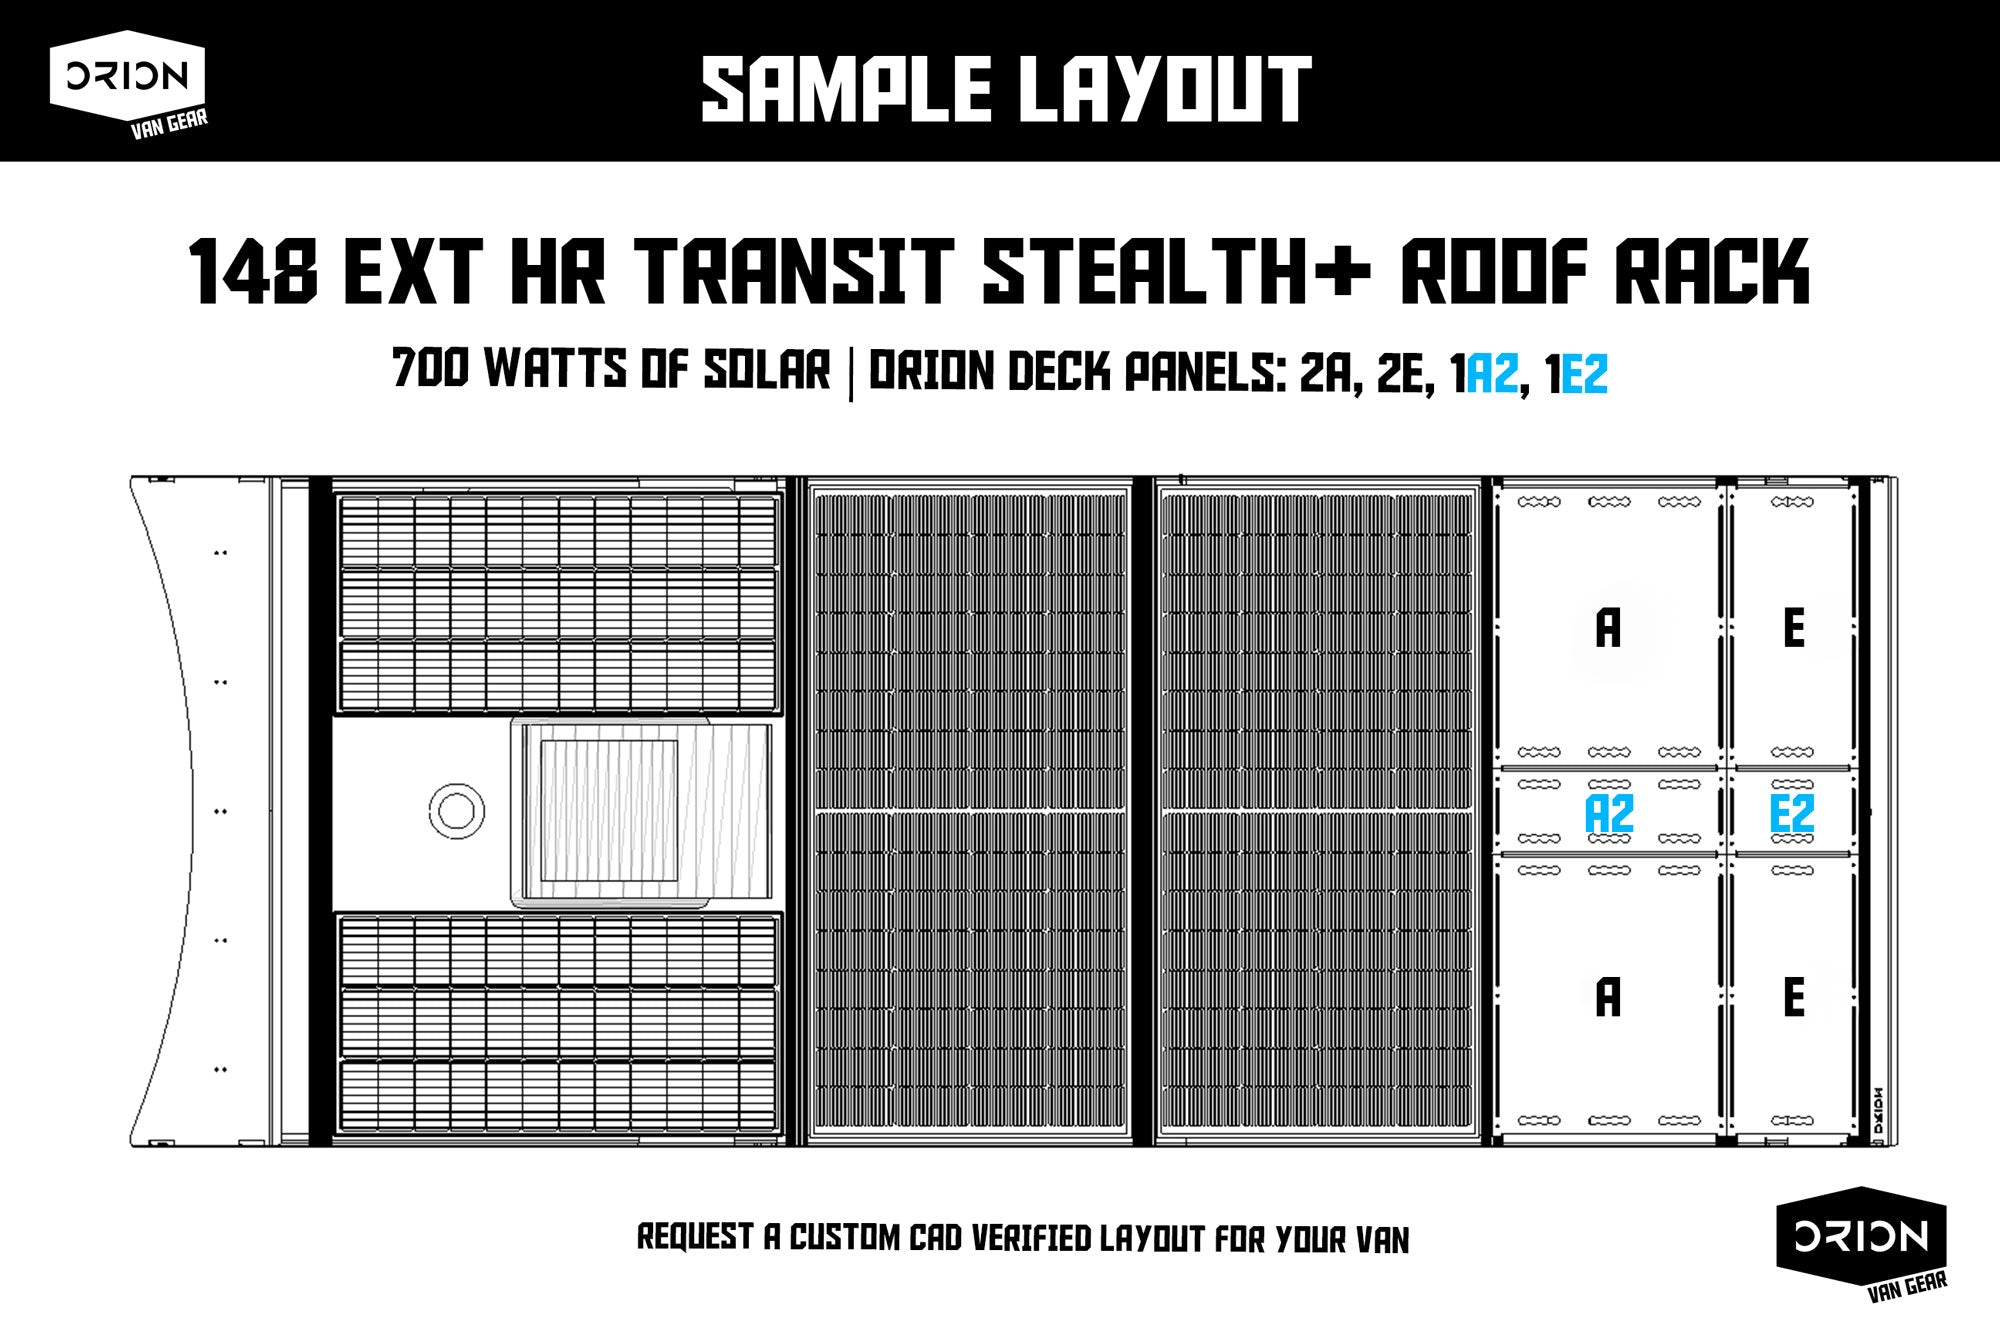 Sample Transit 148 Extended High roof layout with orion roof rack and transit deck panels